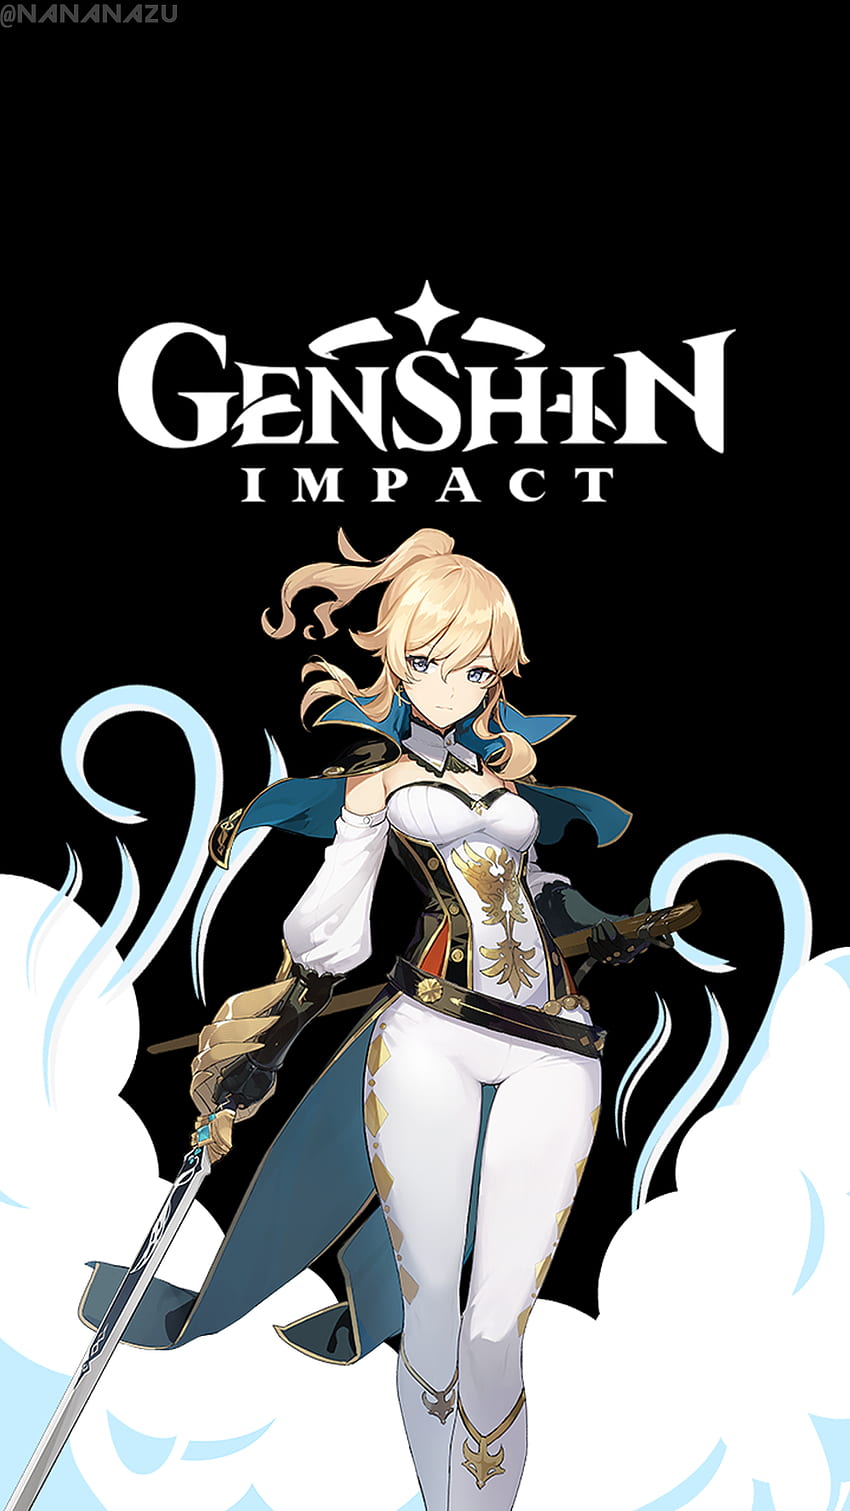 Genshin Impacts New Anime Could Settle the Main Character Debate